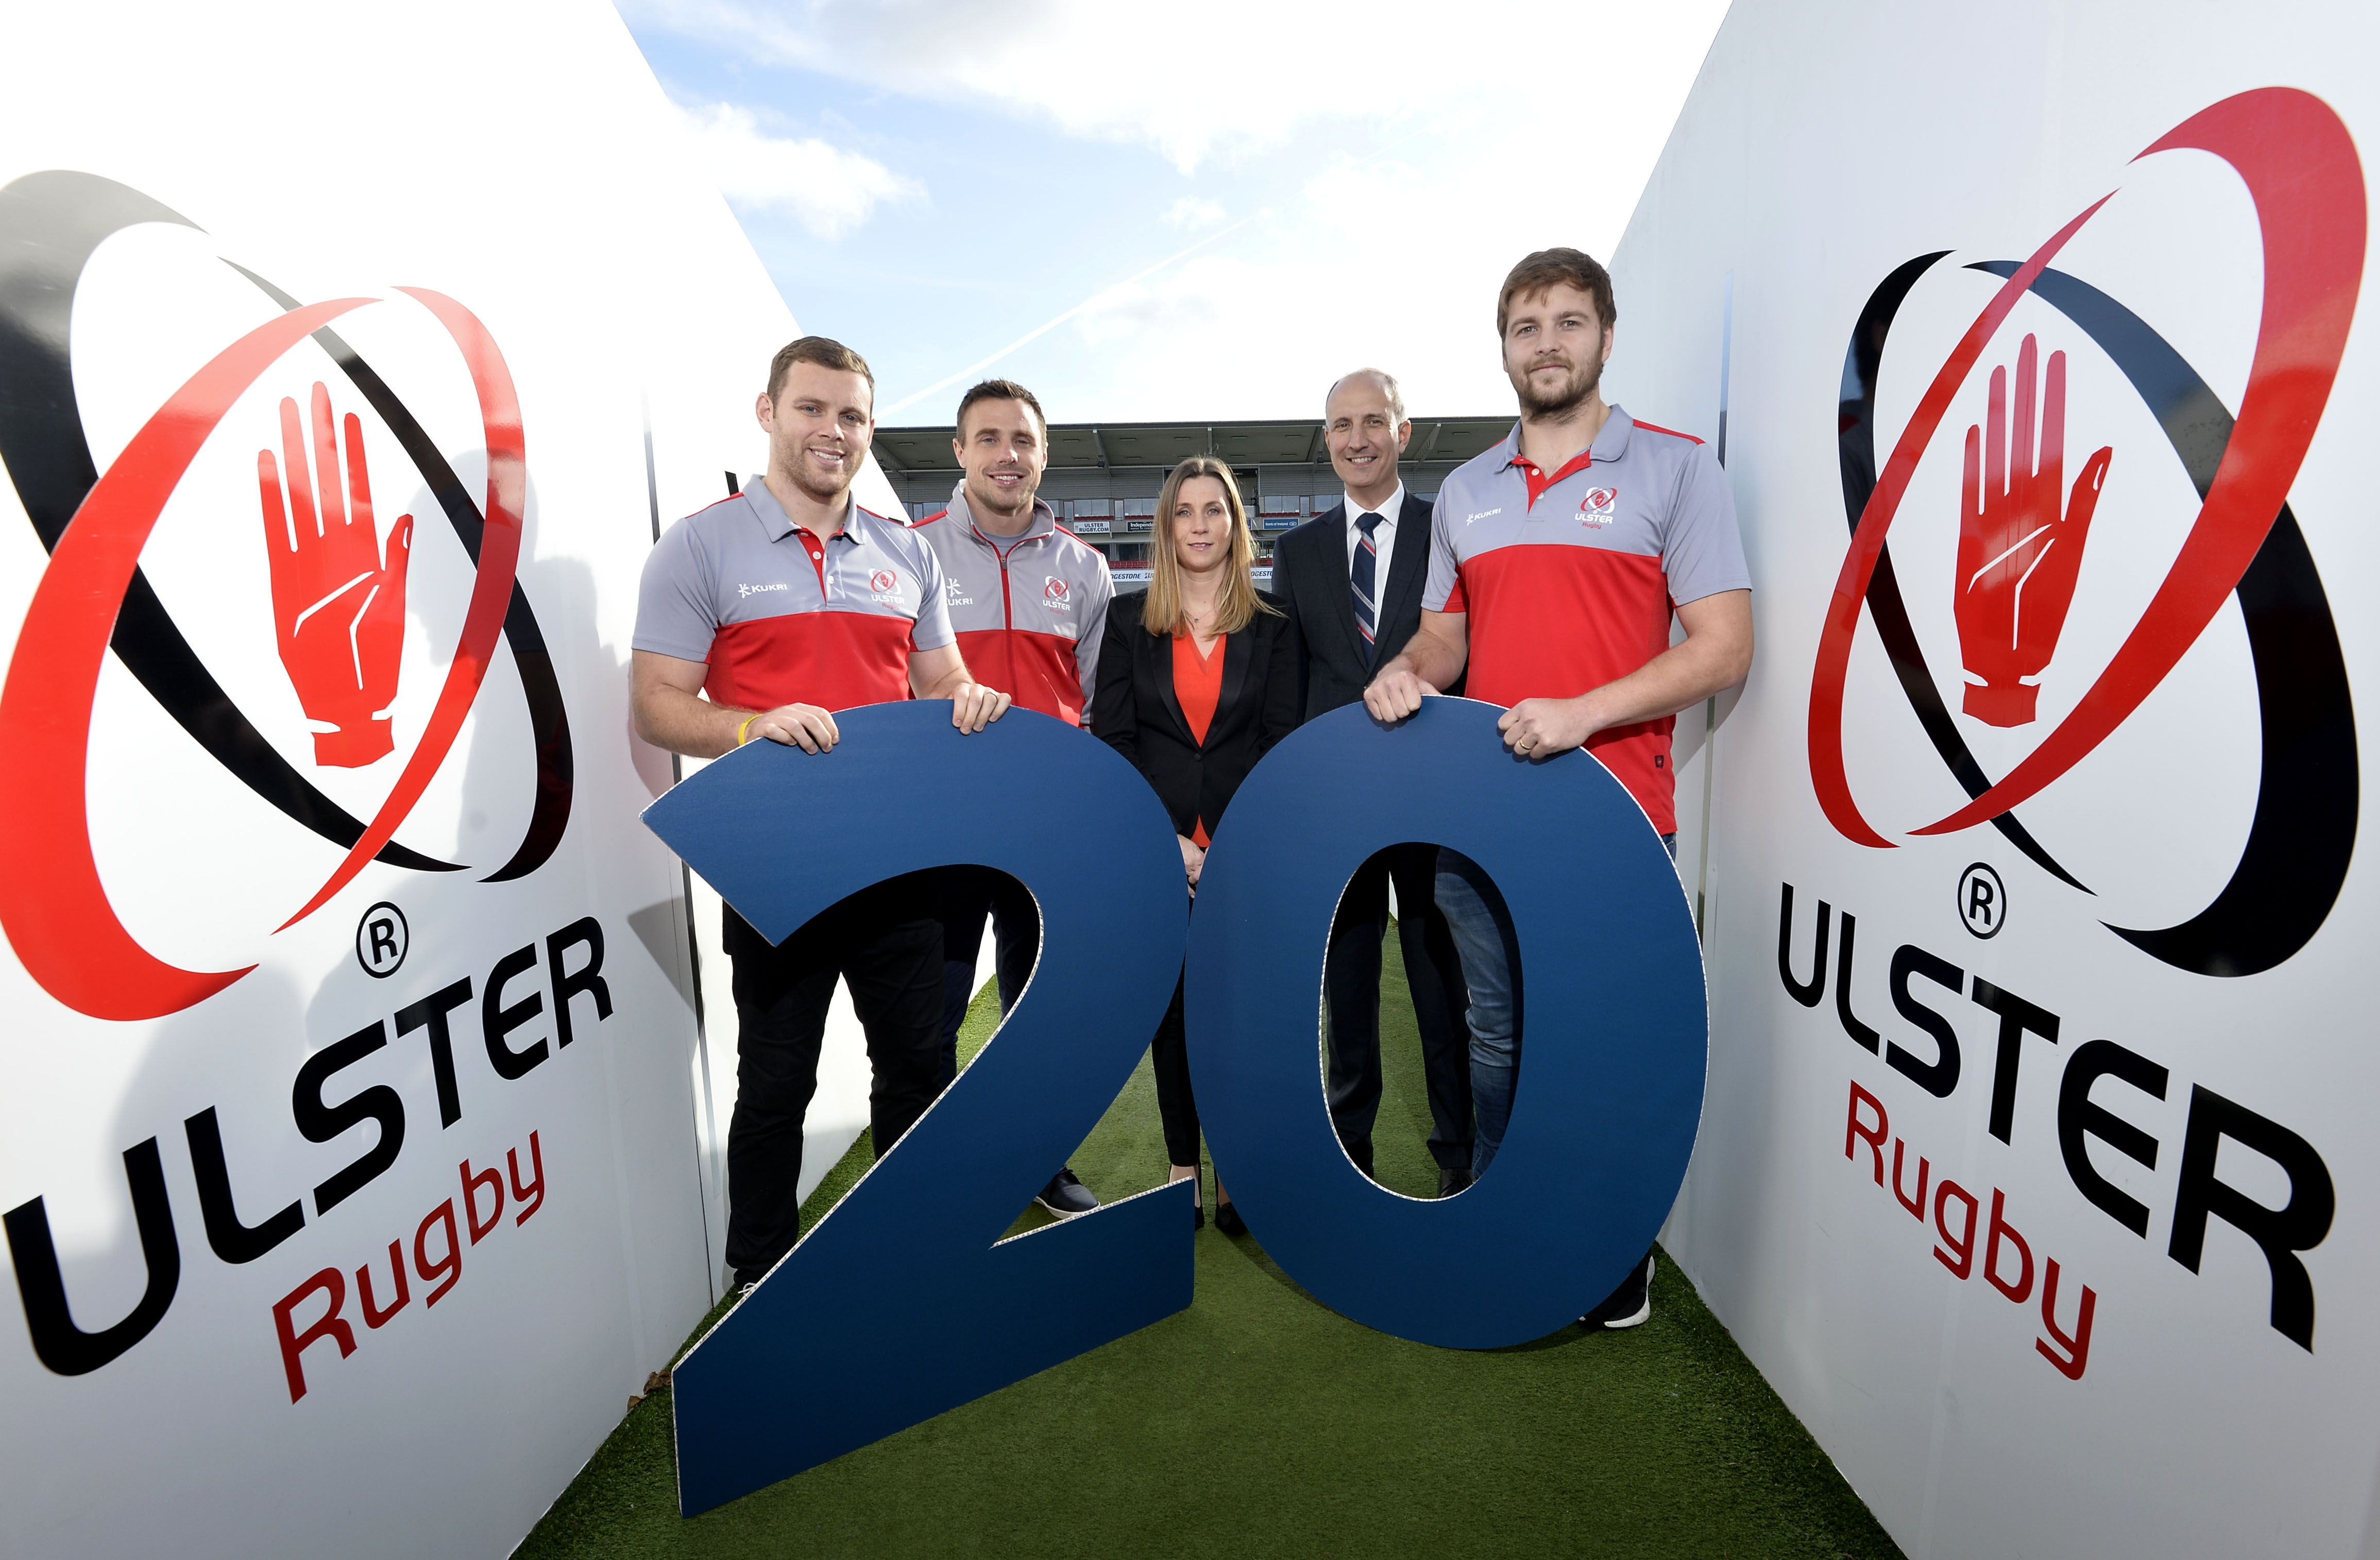 Ulster rugby